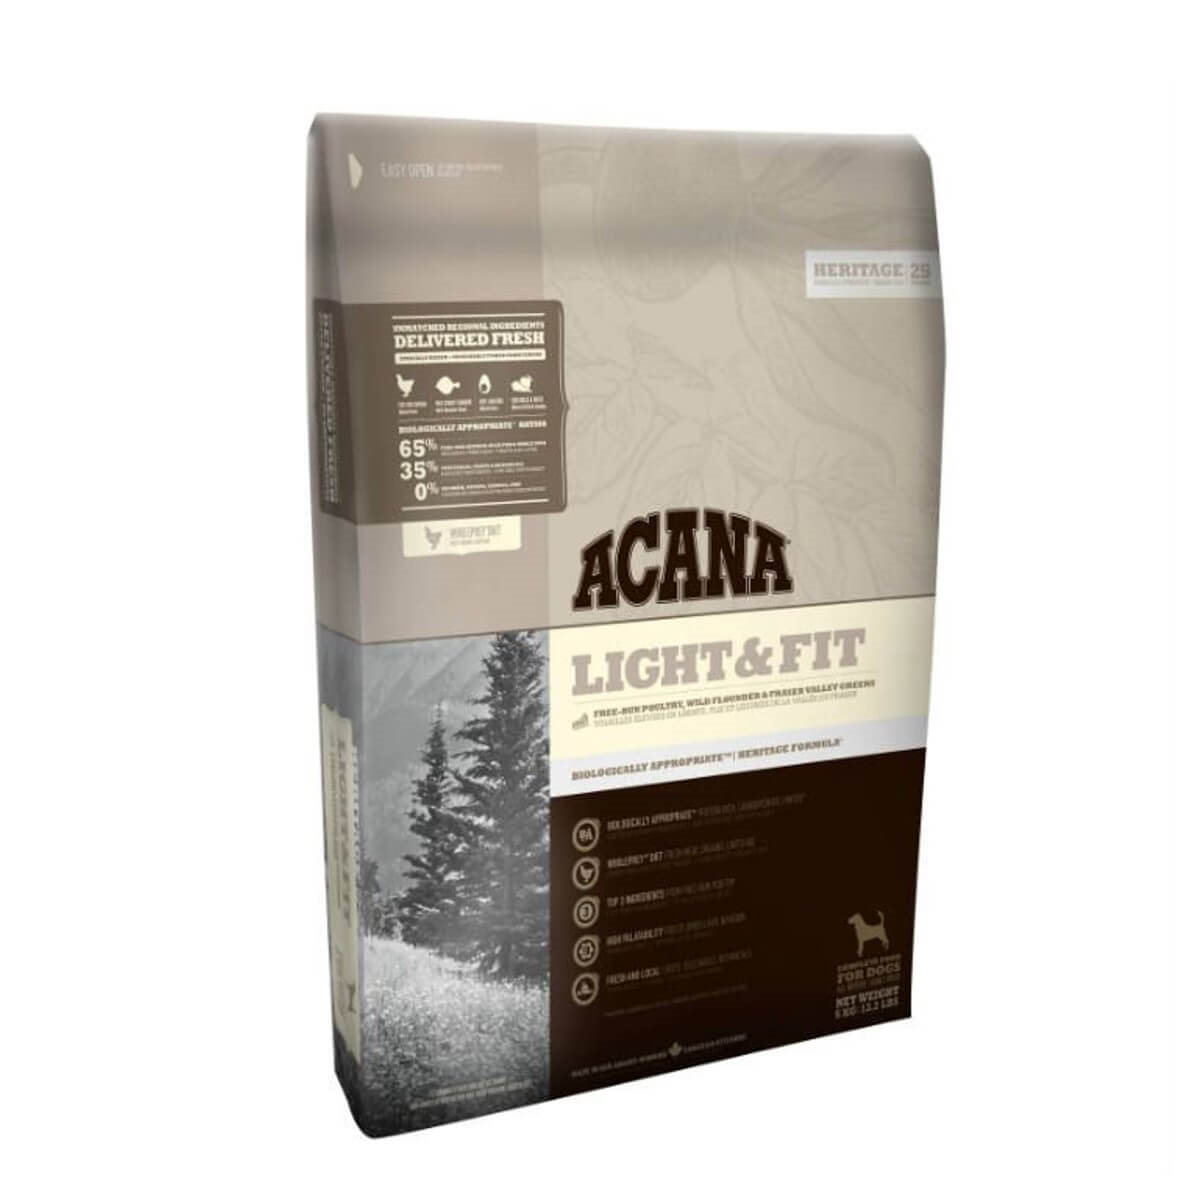 Acana Light and Fit Dog Food  - 11.4 kg